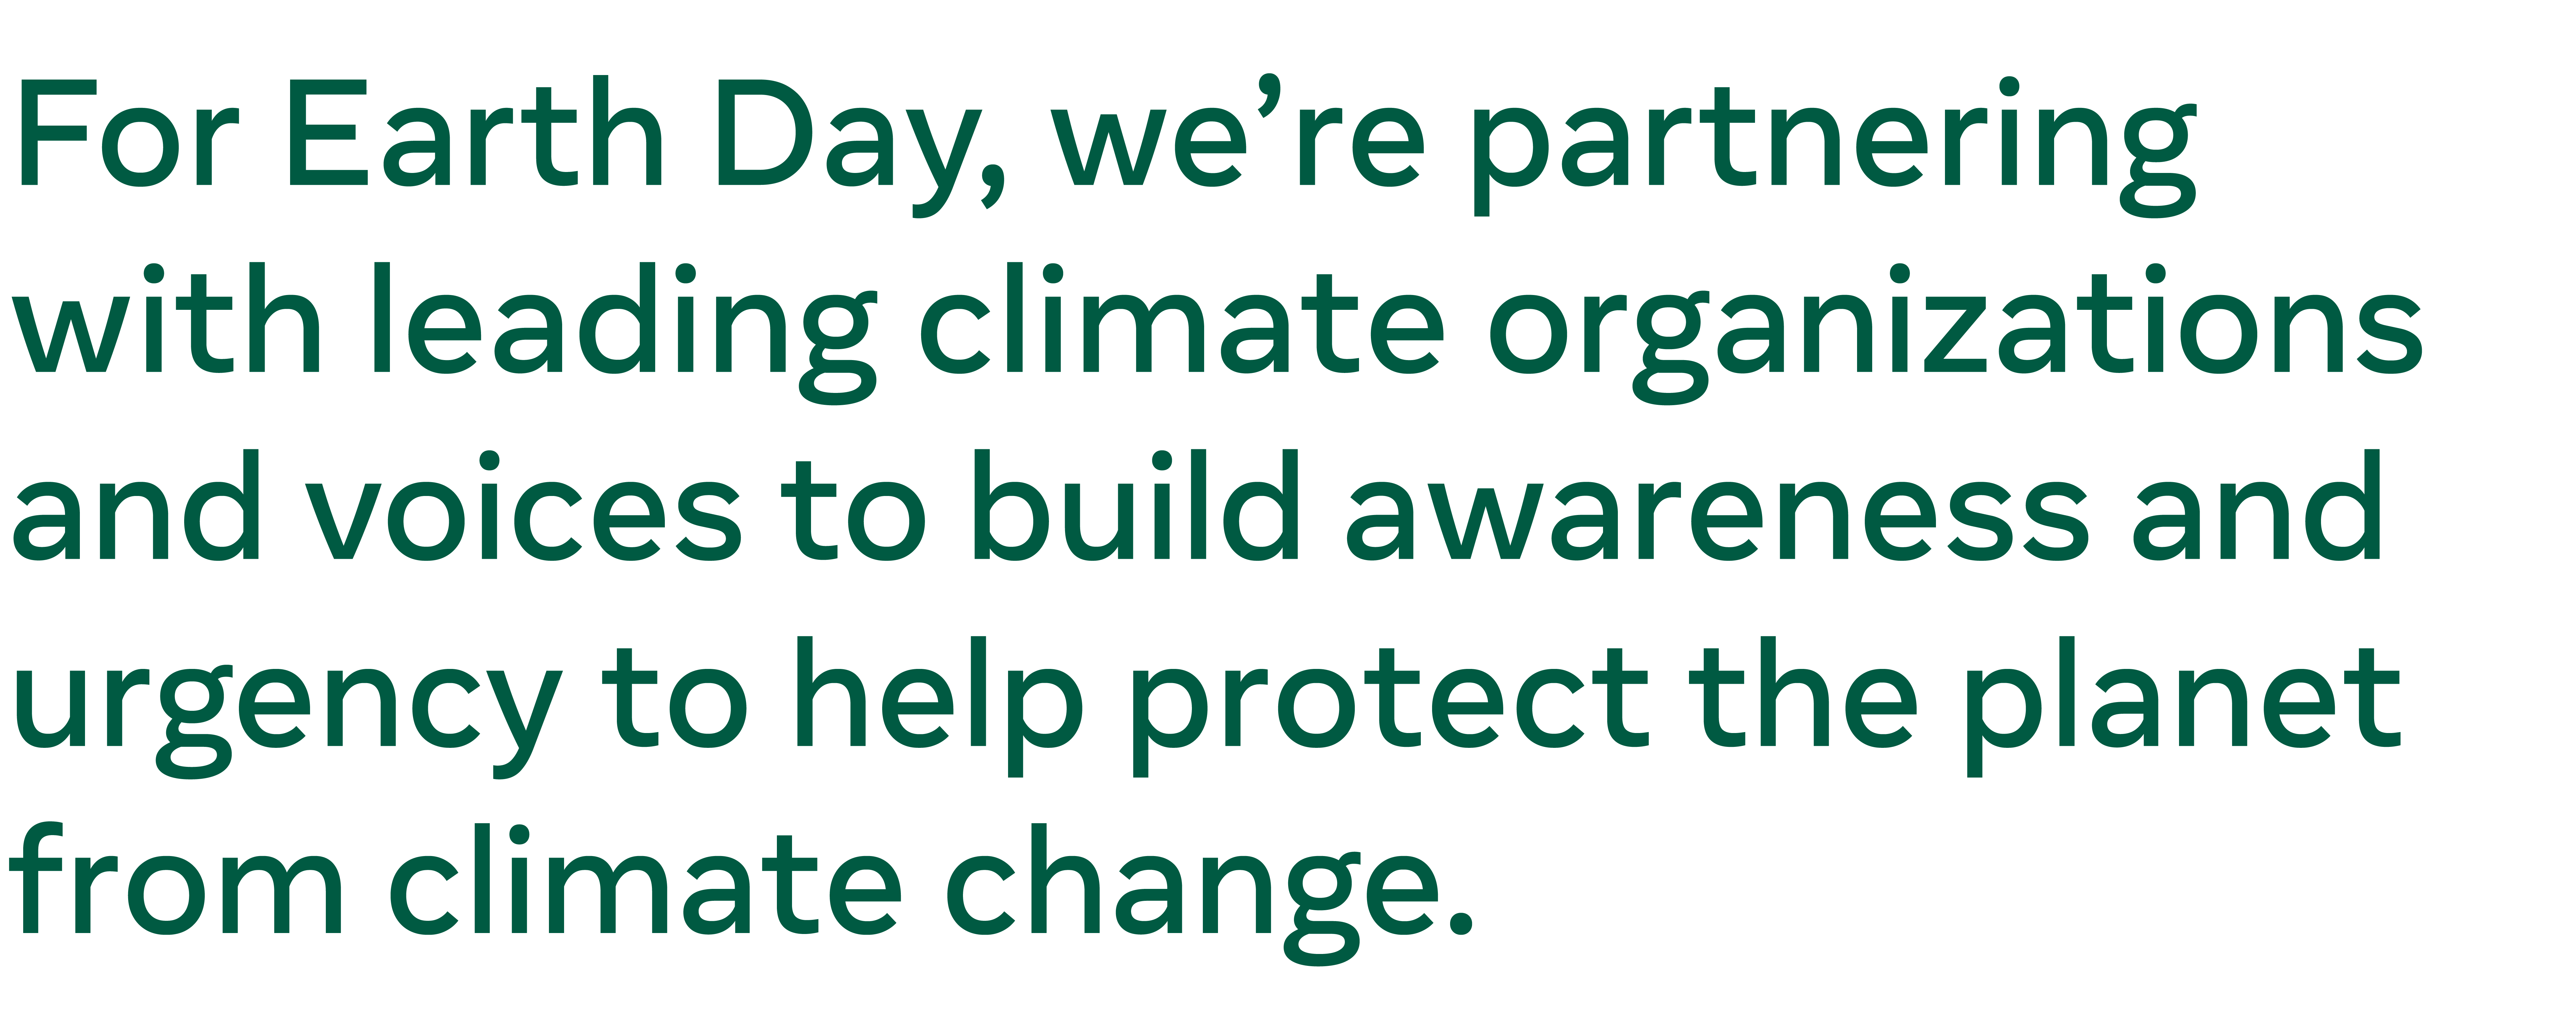 Text graphic: For Earth Day, we’re partnering with leading climate organizations and voices to build awareness and urgency to help protect the planet from climate change. 